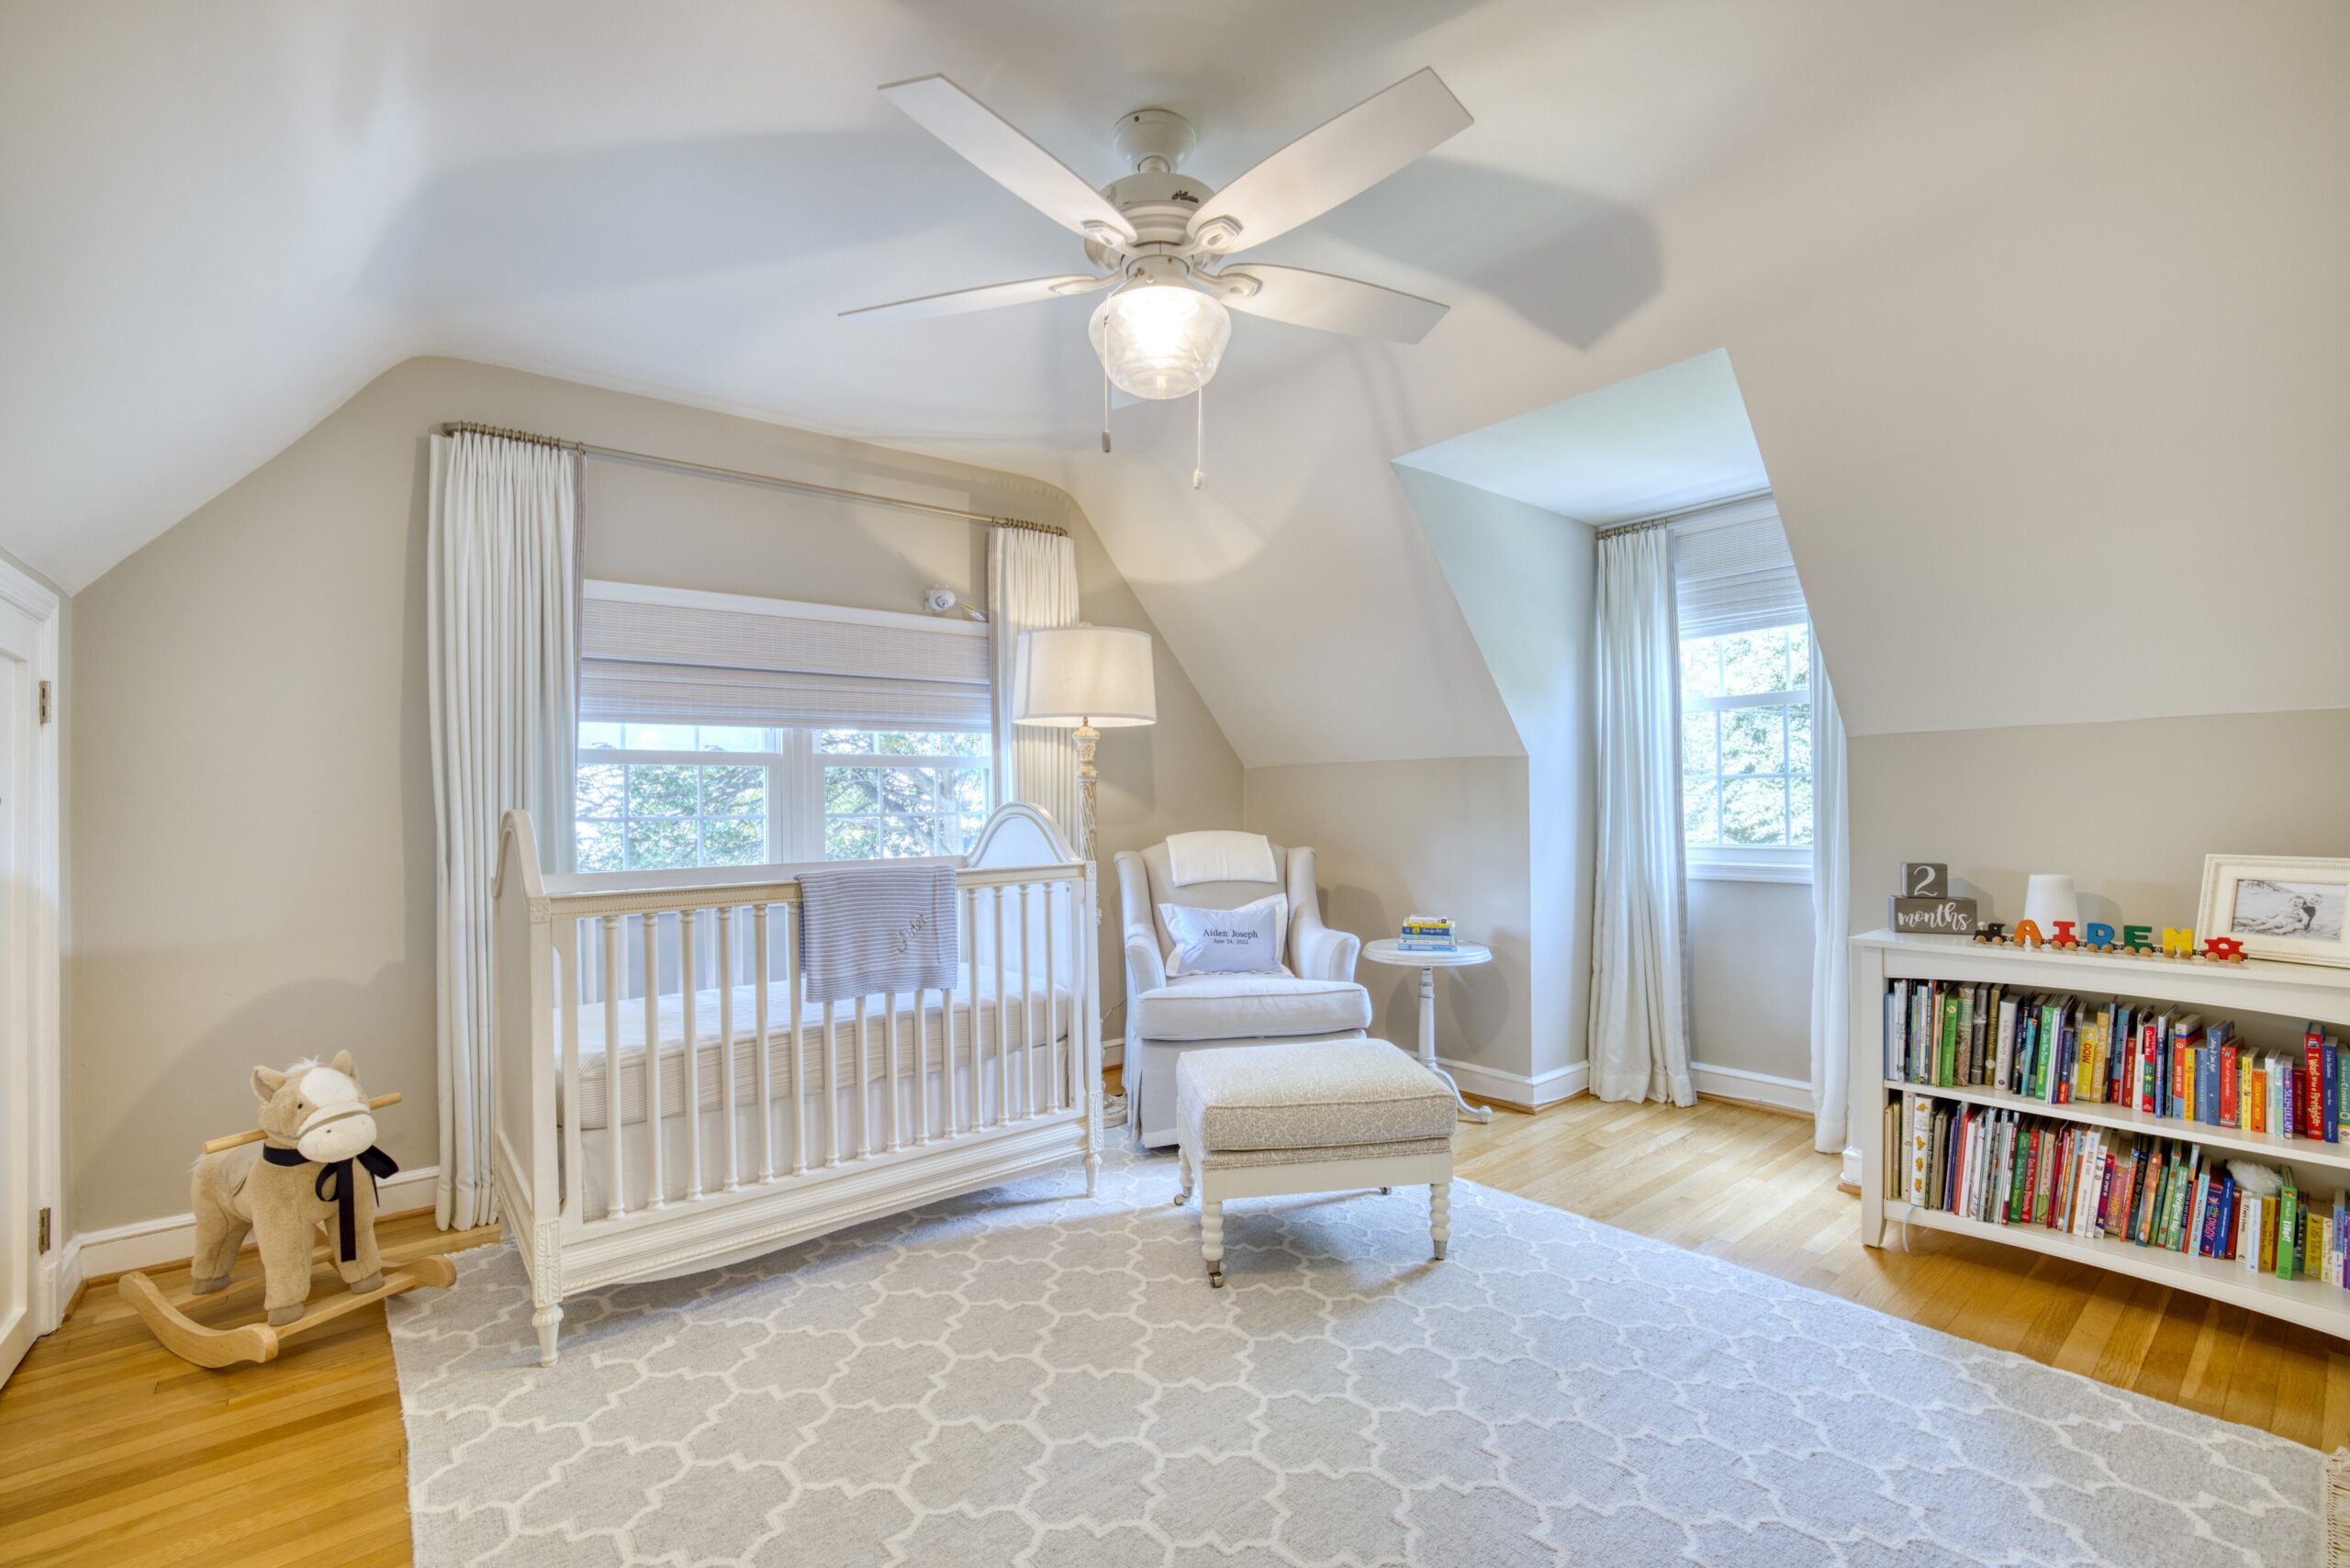 Interior professional photo of nursery room of 1946 Cape Cod home in Alexandria, VA with neutral staging